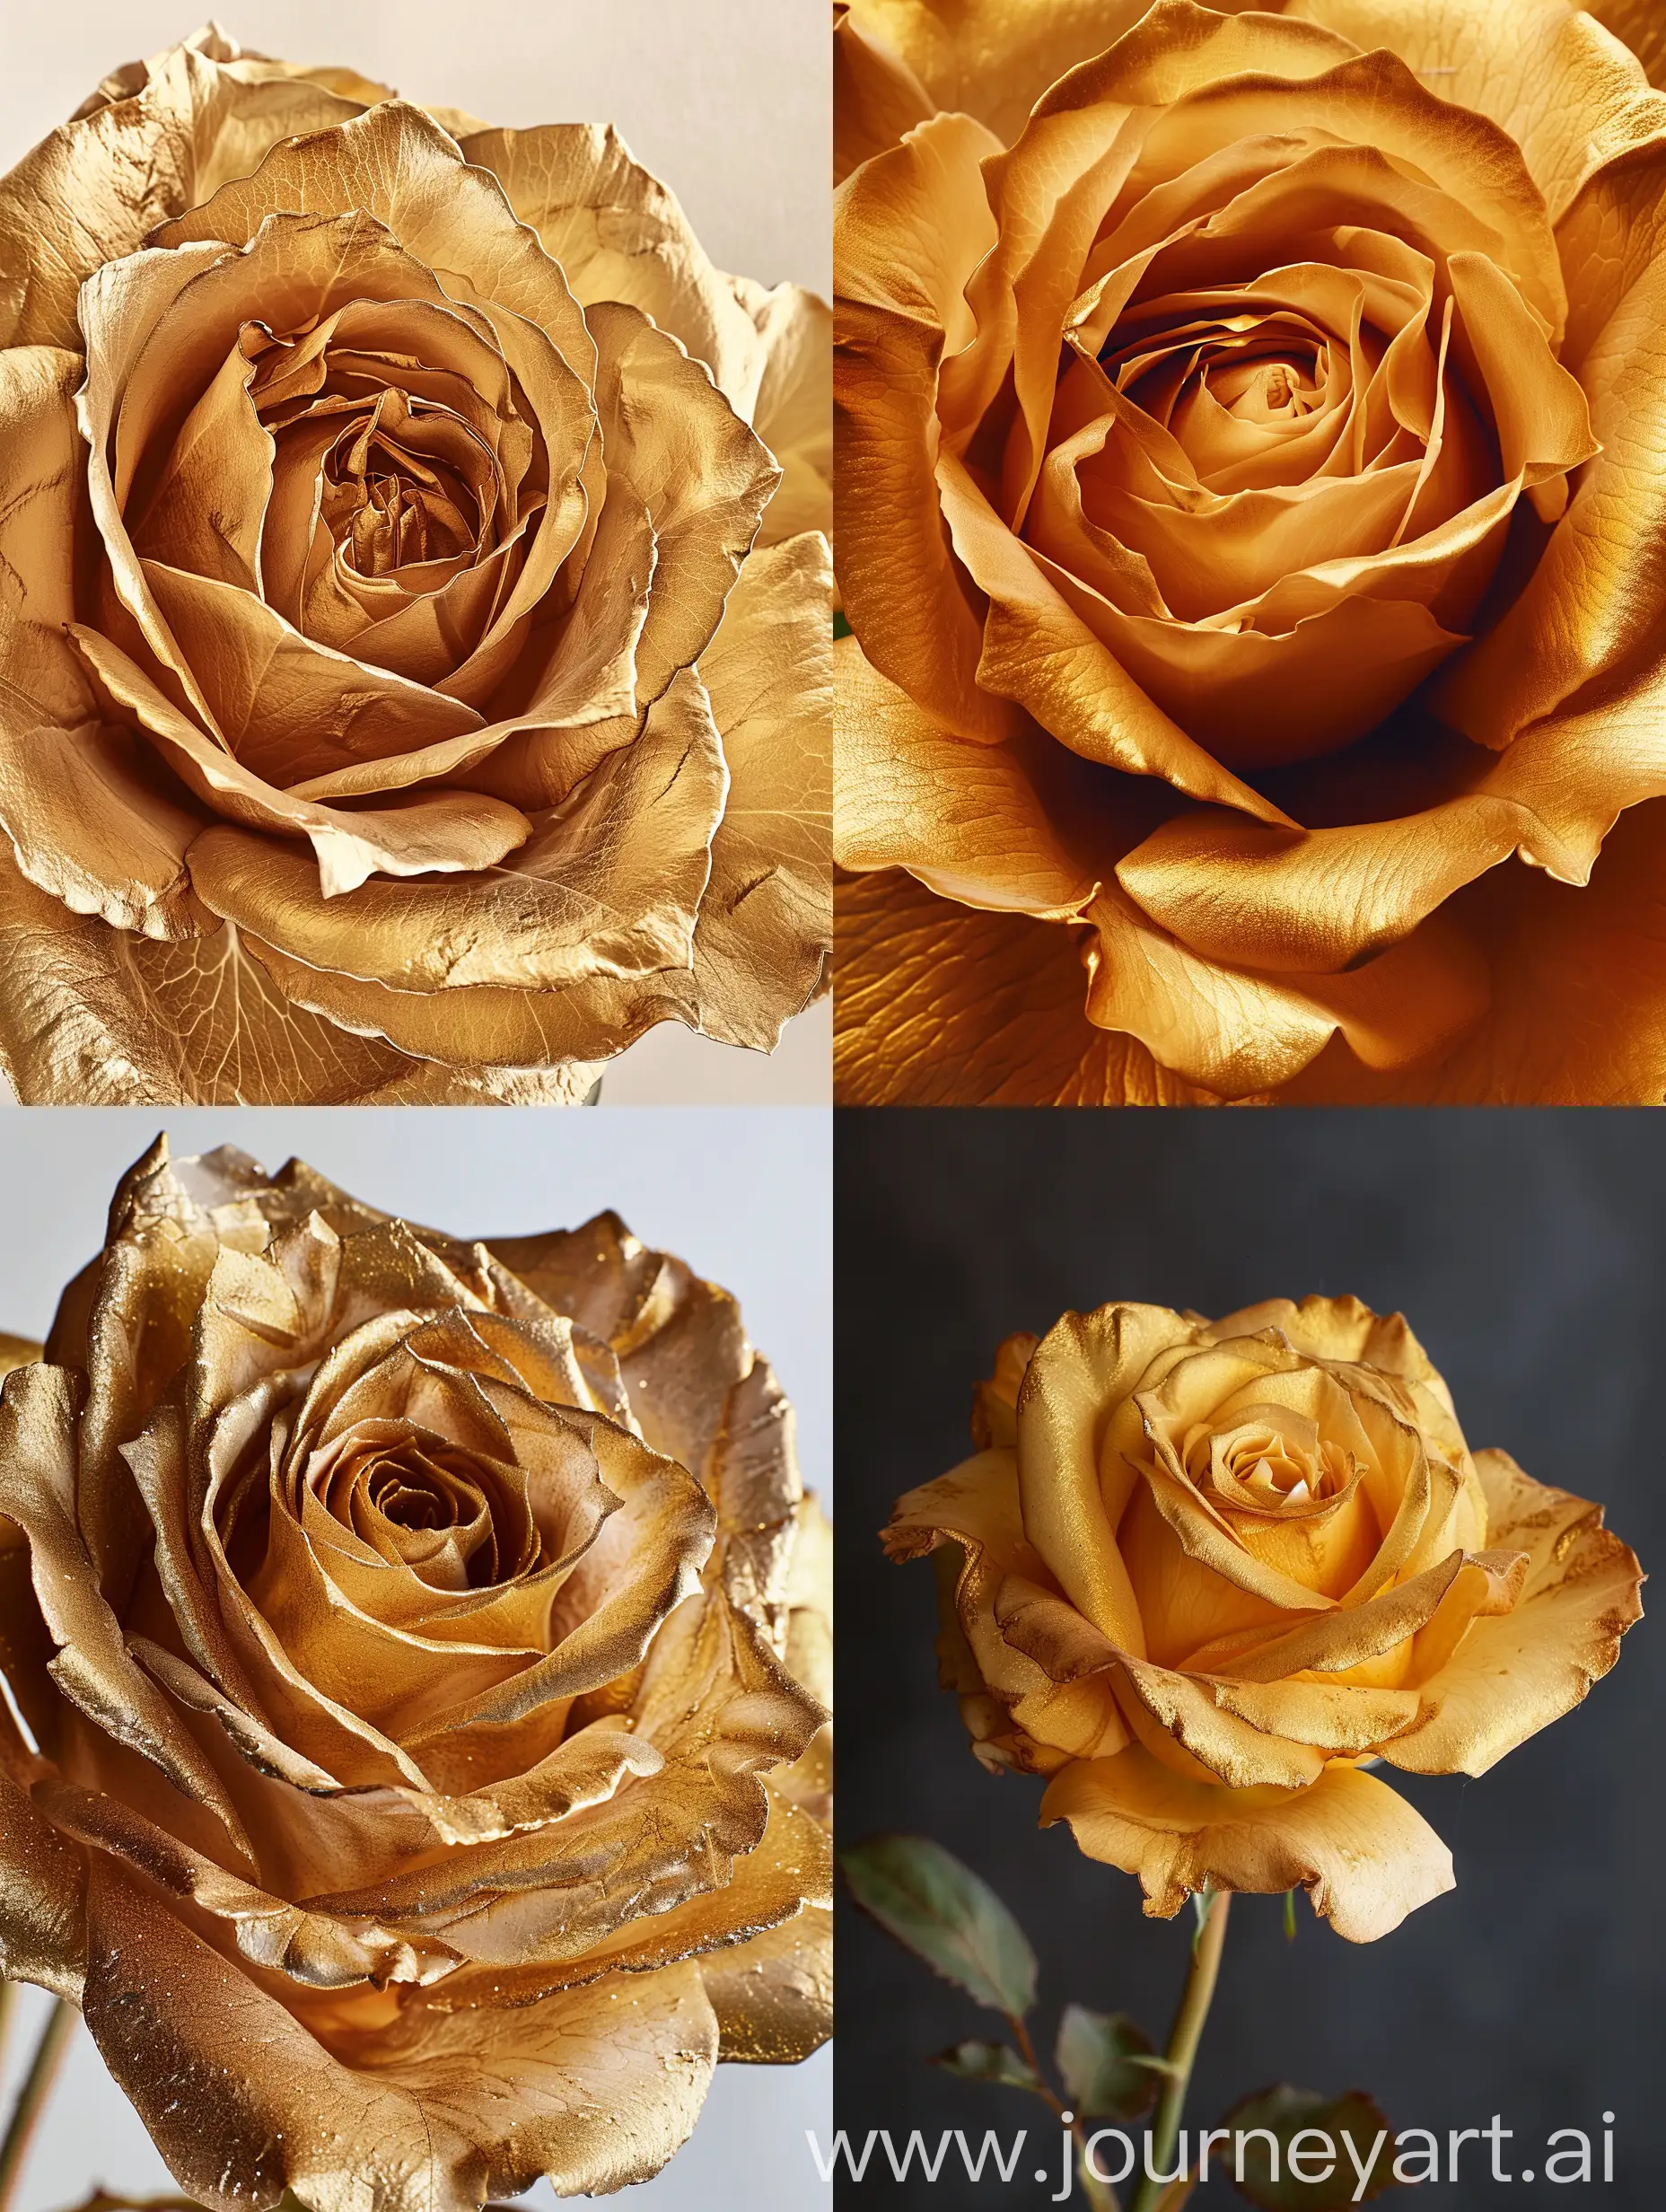 a full view of a golden rose, ultra realistic